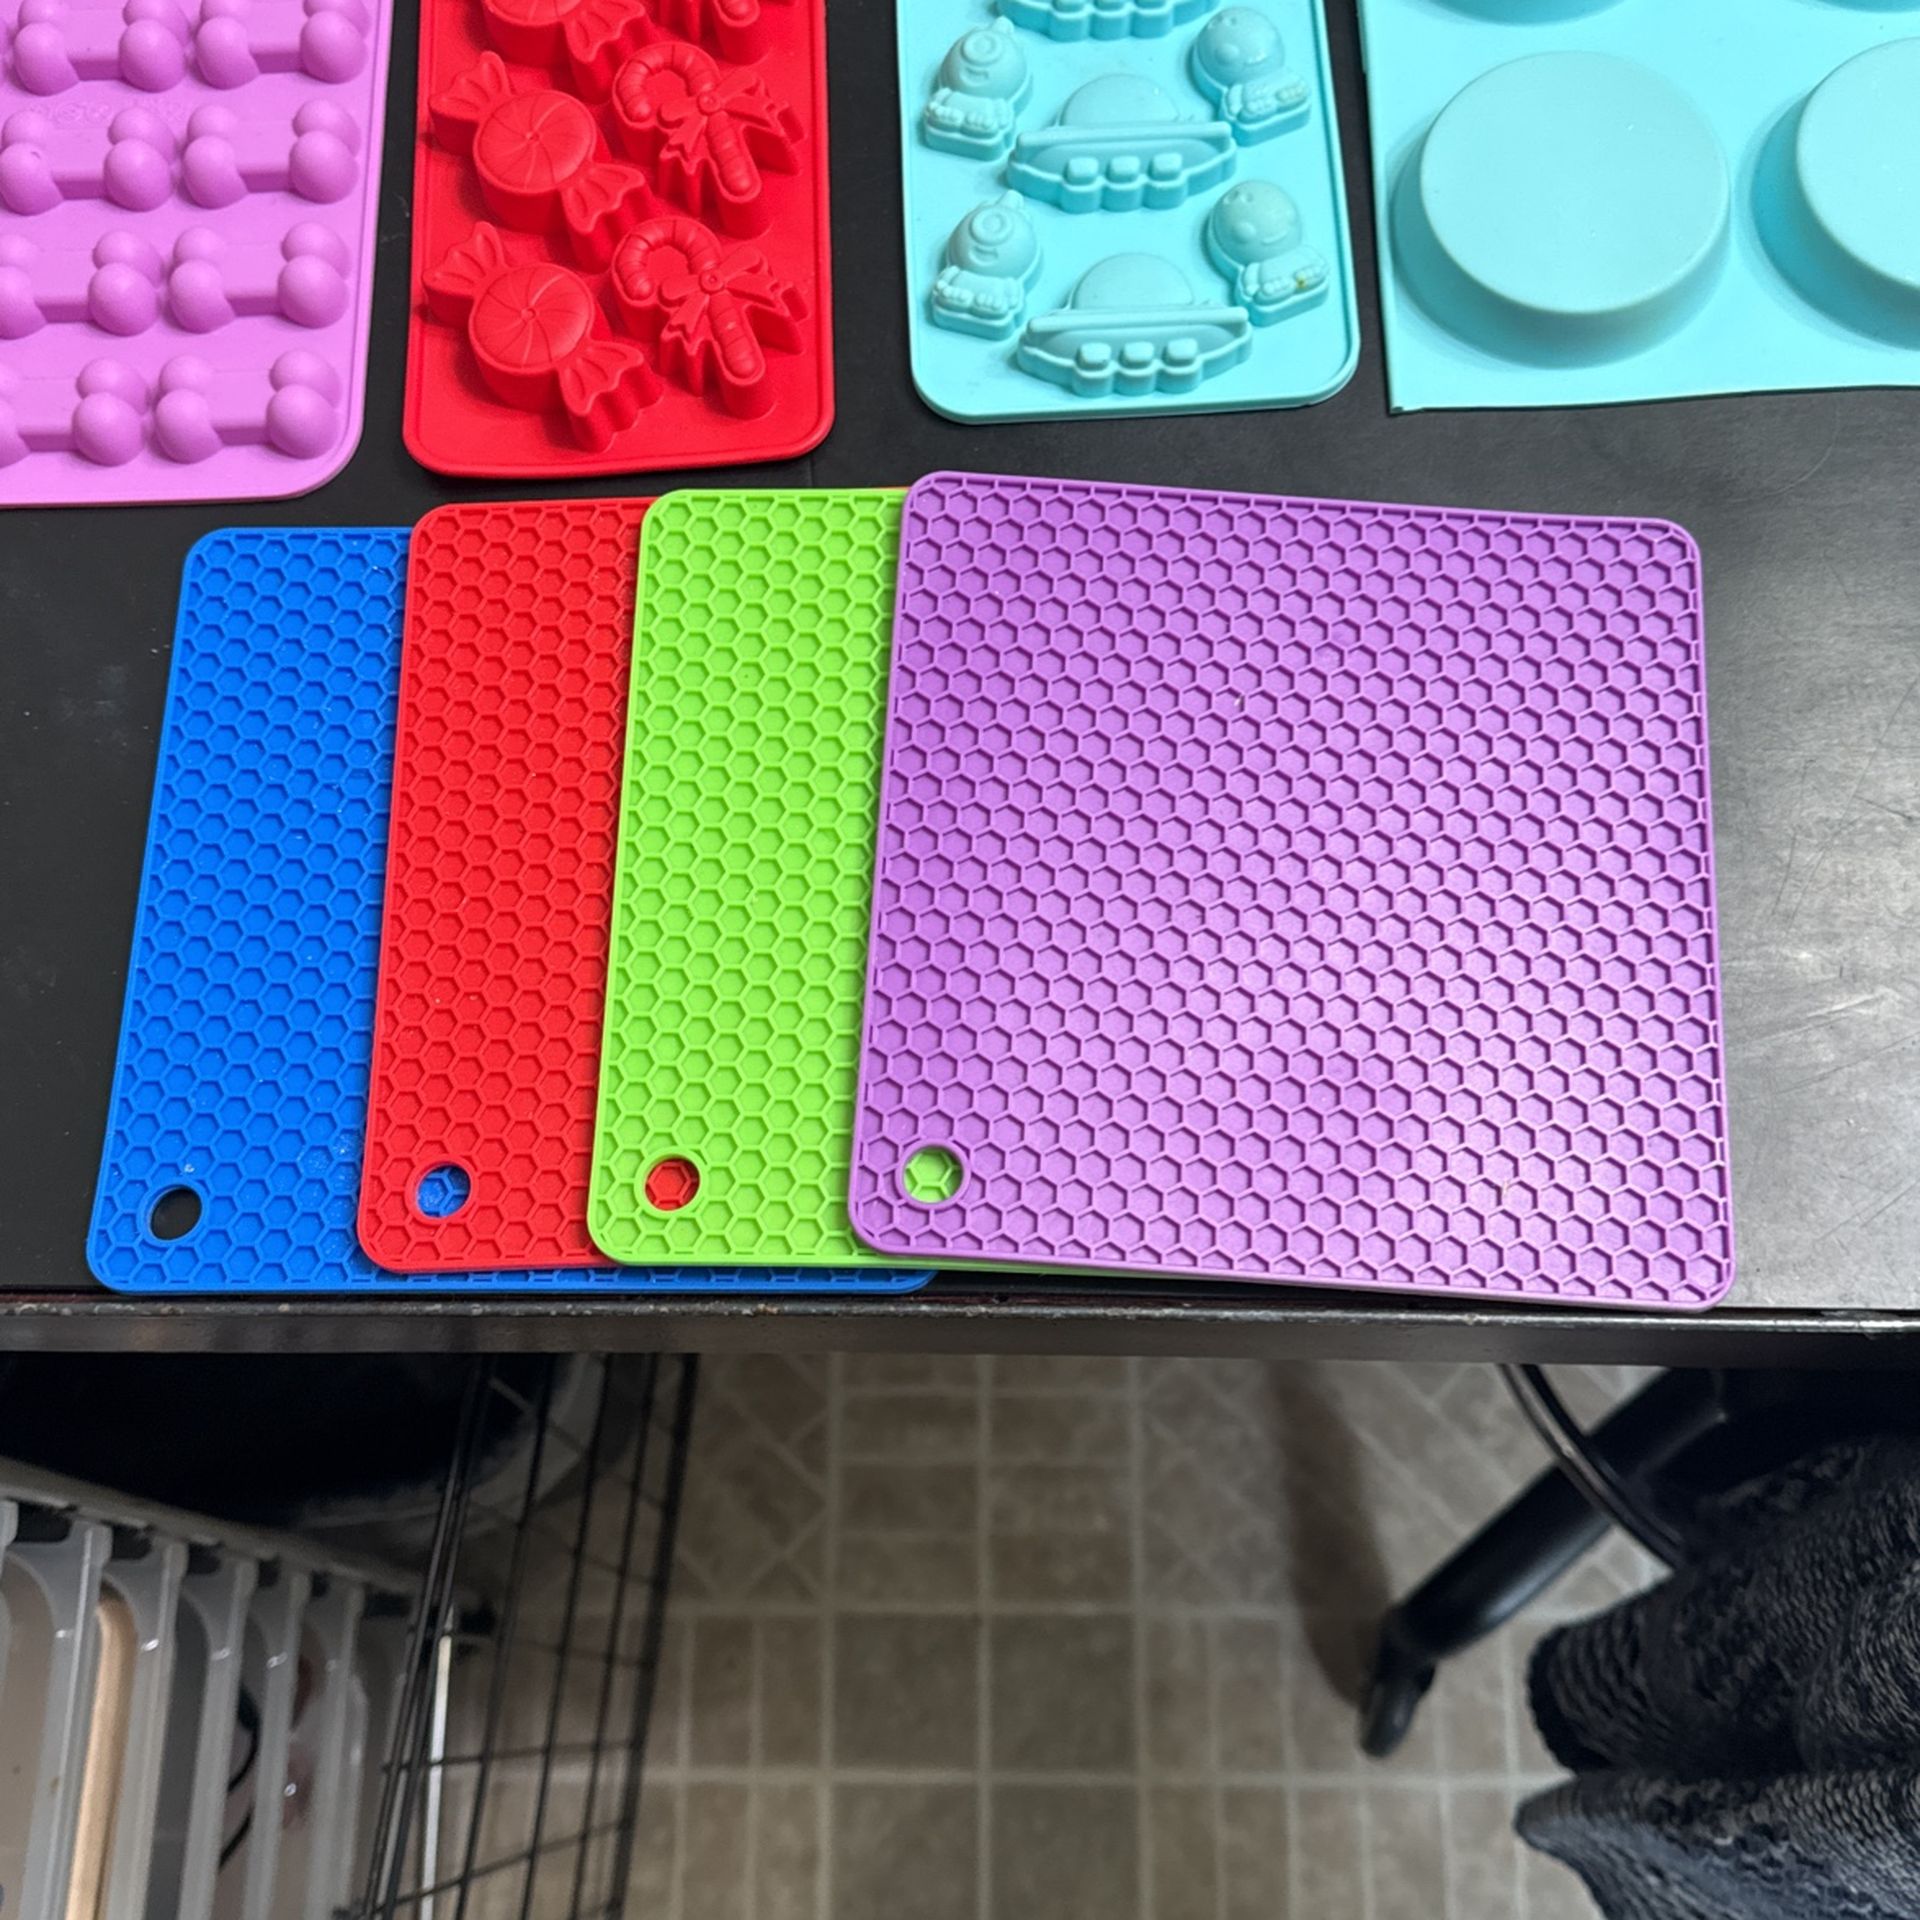 Silicon Molds For Crafting 